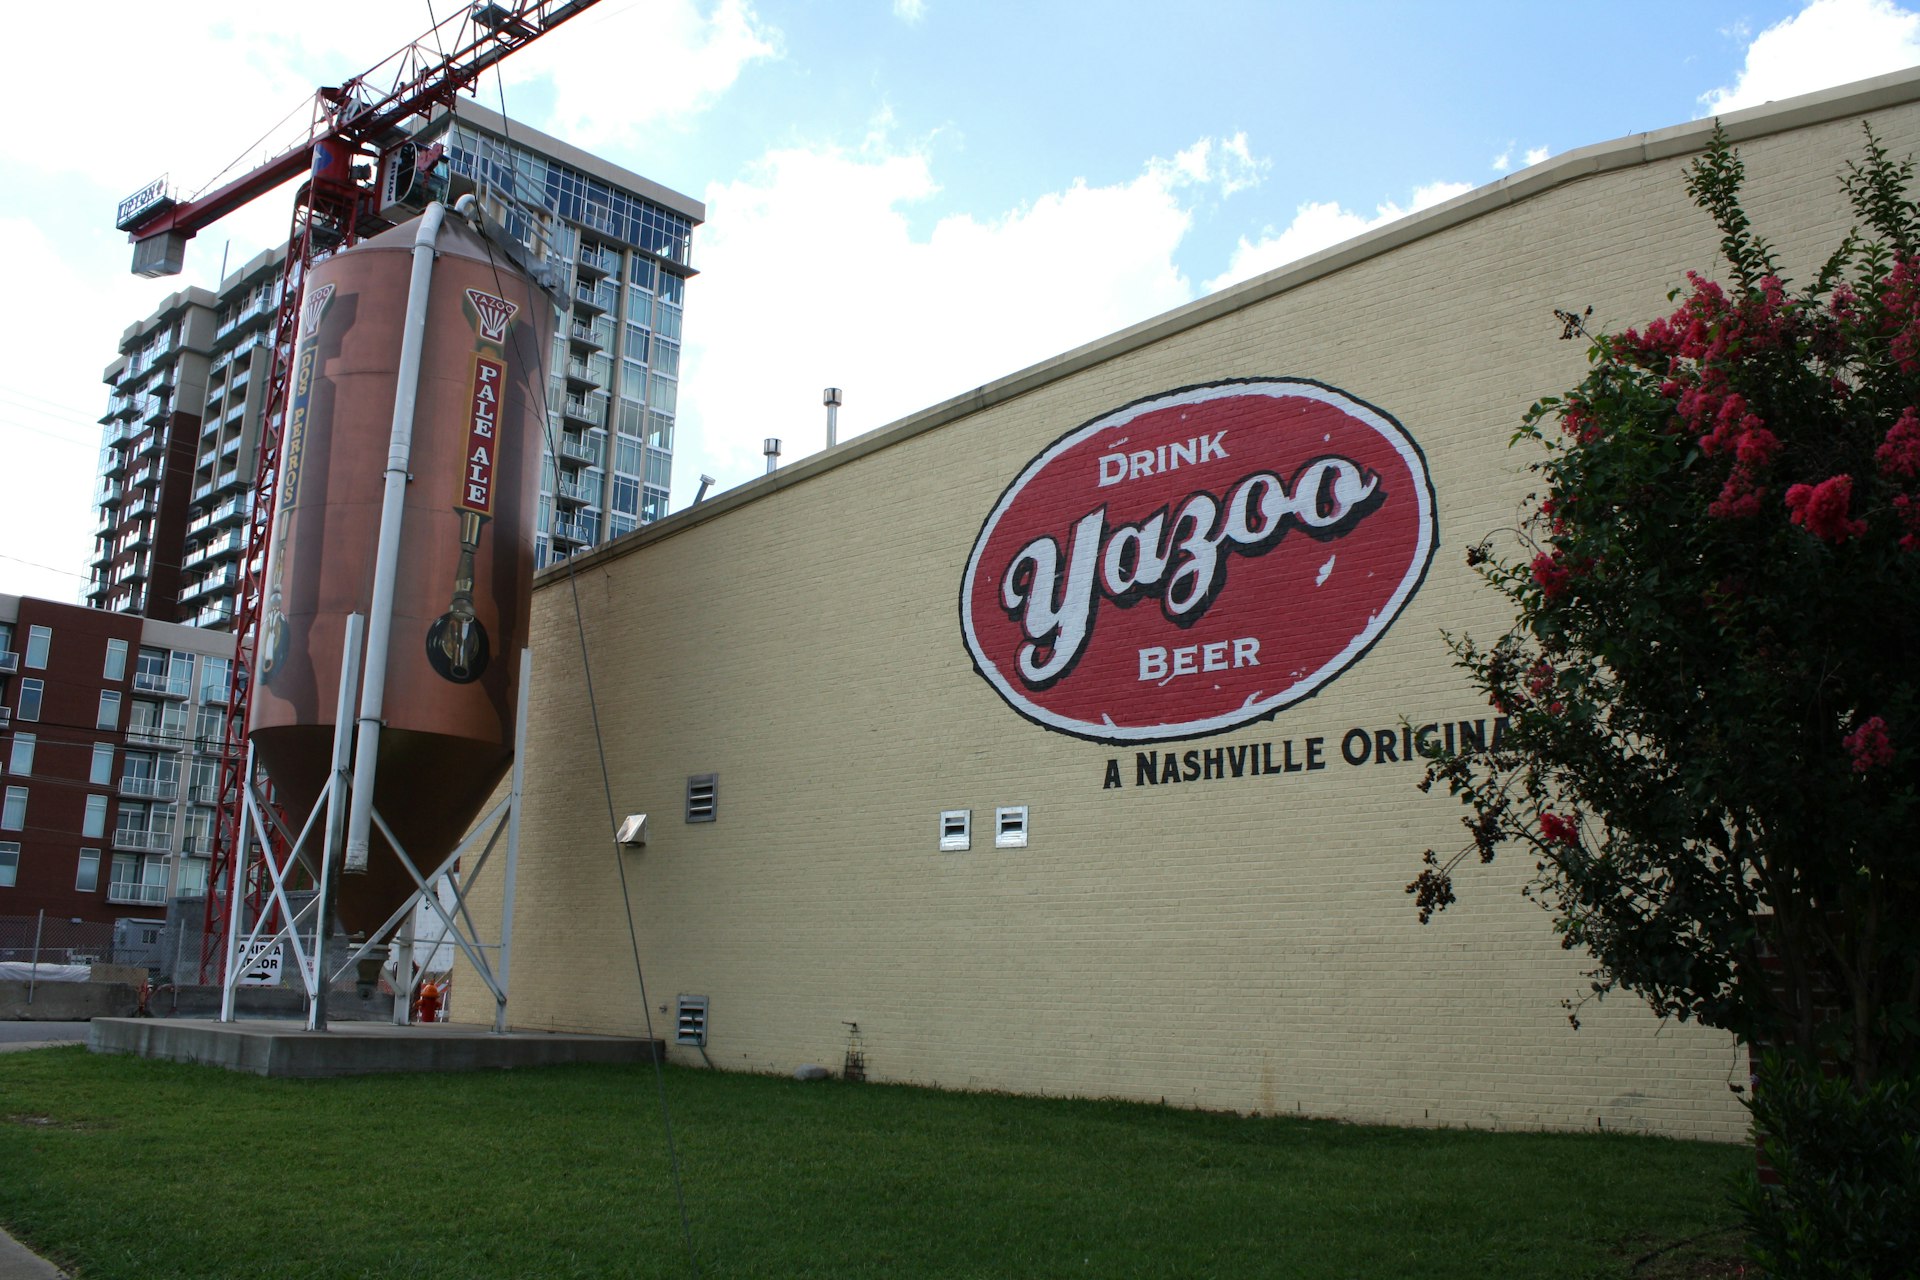 Exterior of the Yazoo brewery, one of the vanguards of the Nashville craft beer scene. Image by Alexander Howard / Lonely Planet